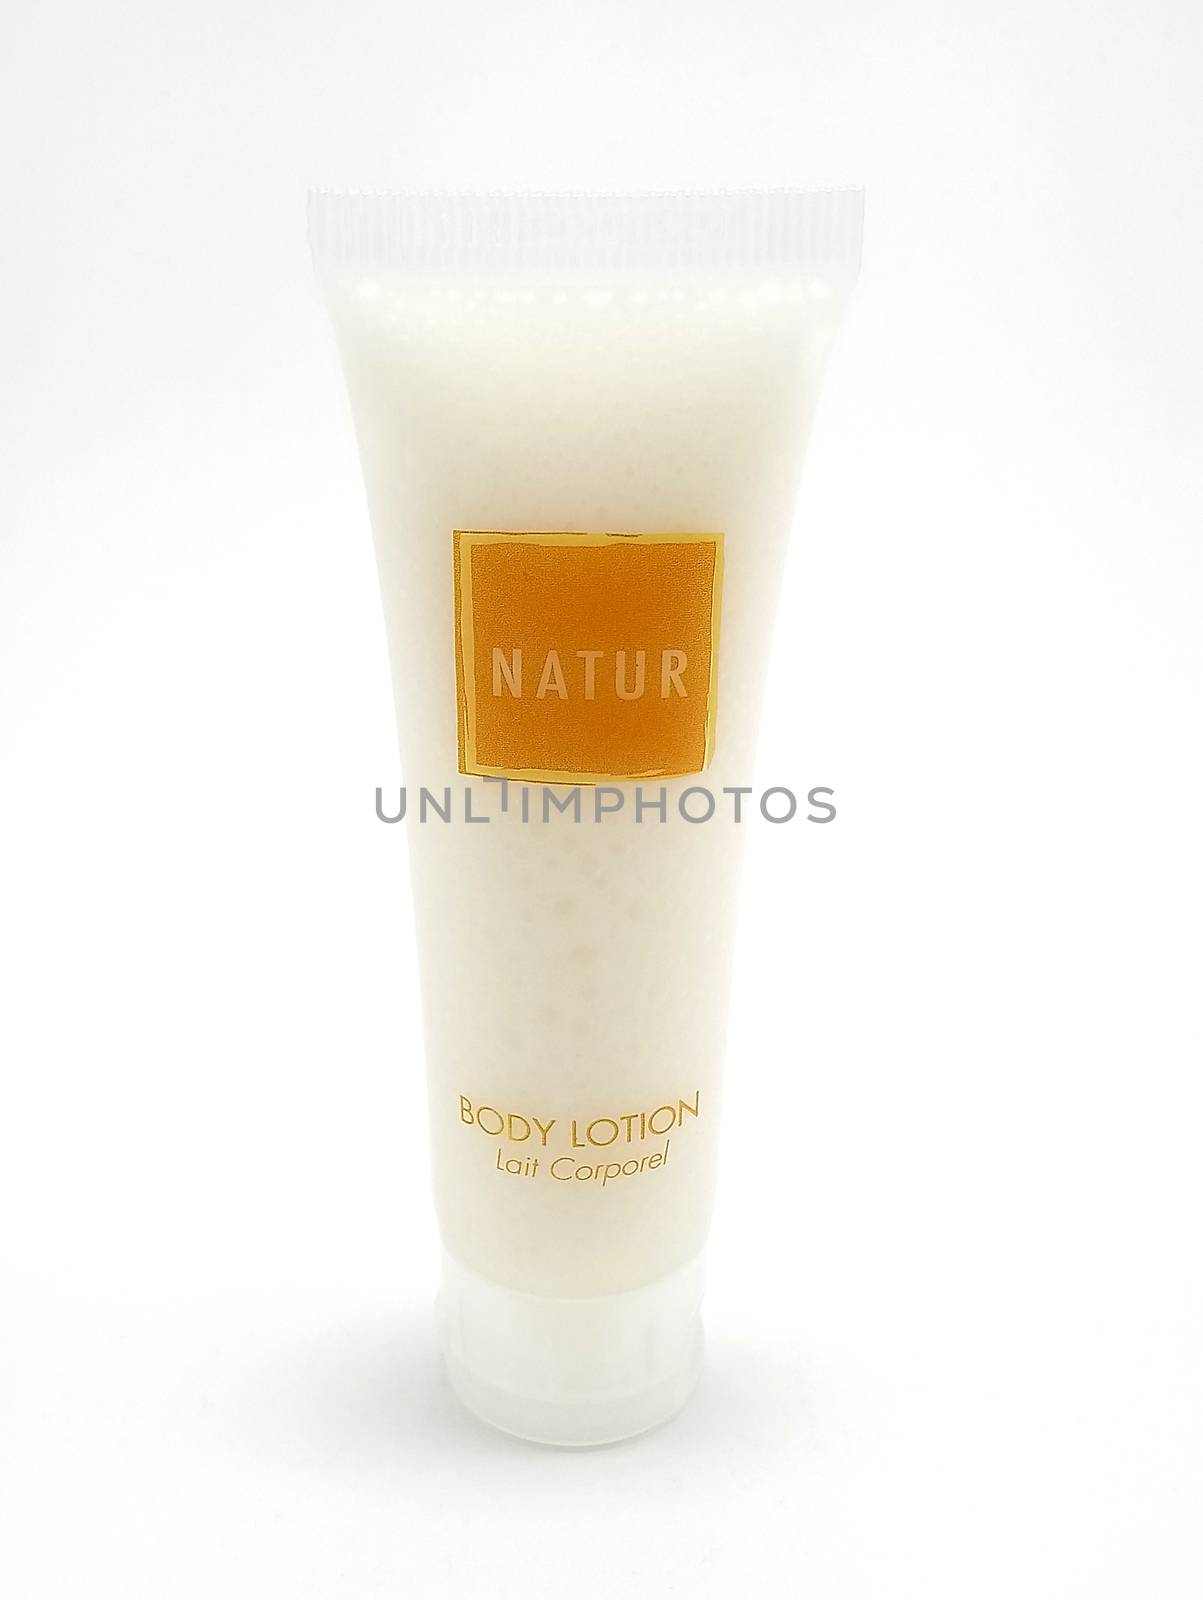 Natur body lotion in Manila, Philippines by imwaltersy